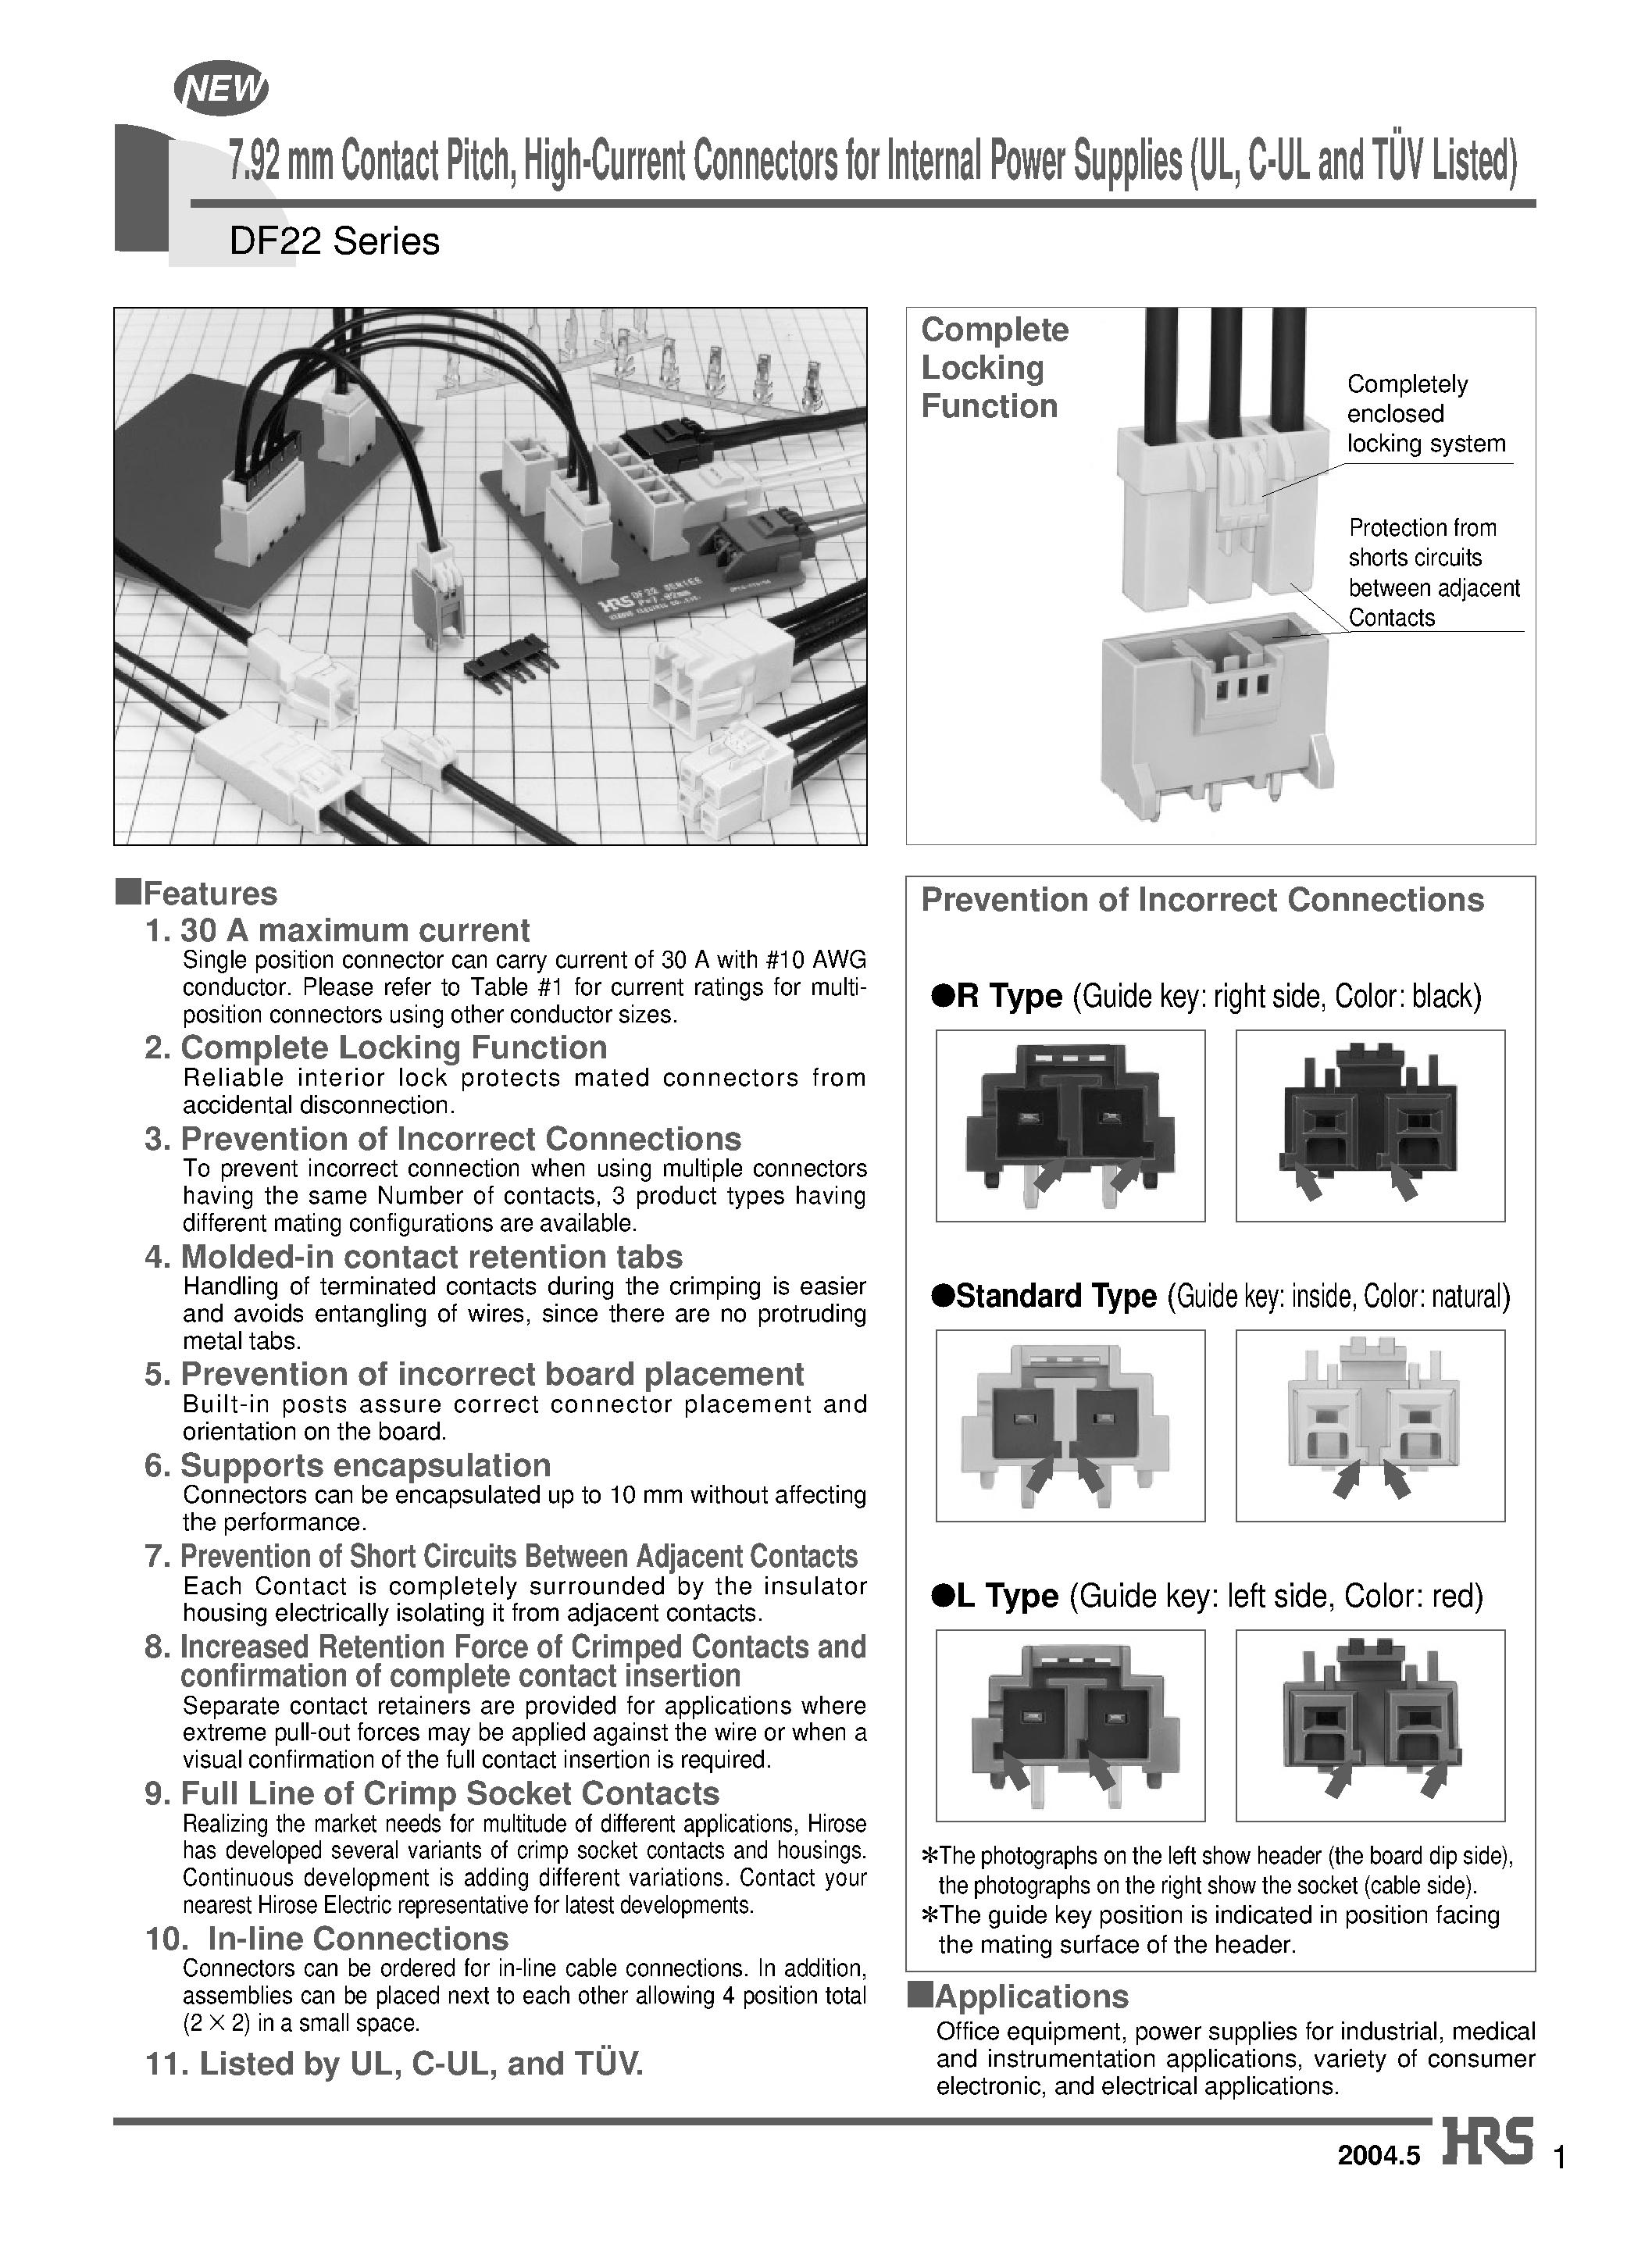 Datasheet DF22-3S-7.92DSA - 7.92 mm Contact Pitch/ High-Current Connectors for Internal Power Supplies (UL/ C-UL and TUV Listed) page 1